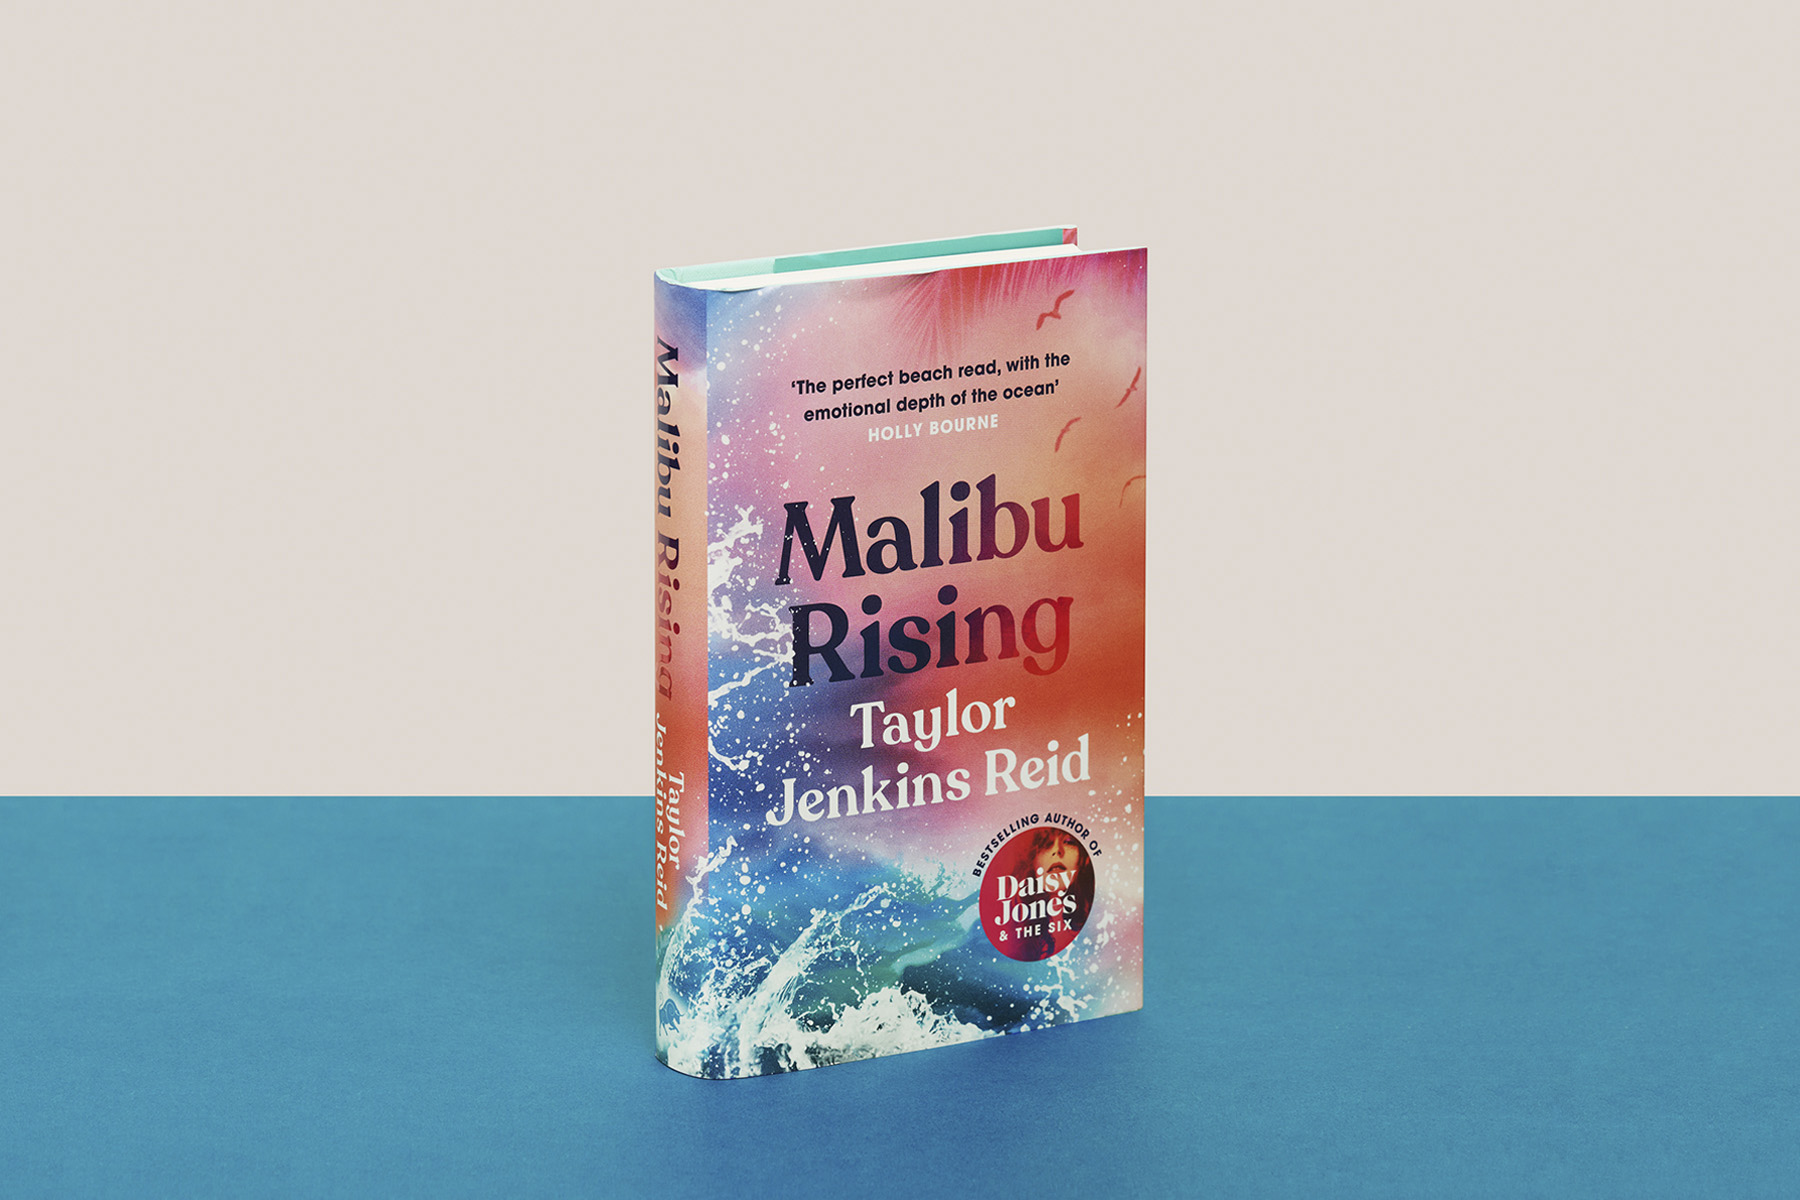 A photograph of a copy of Malibu Rising against a blue and cream backdrop